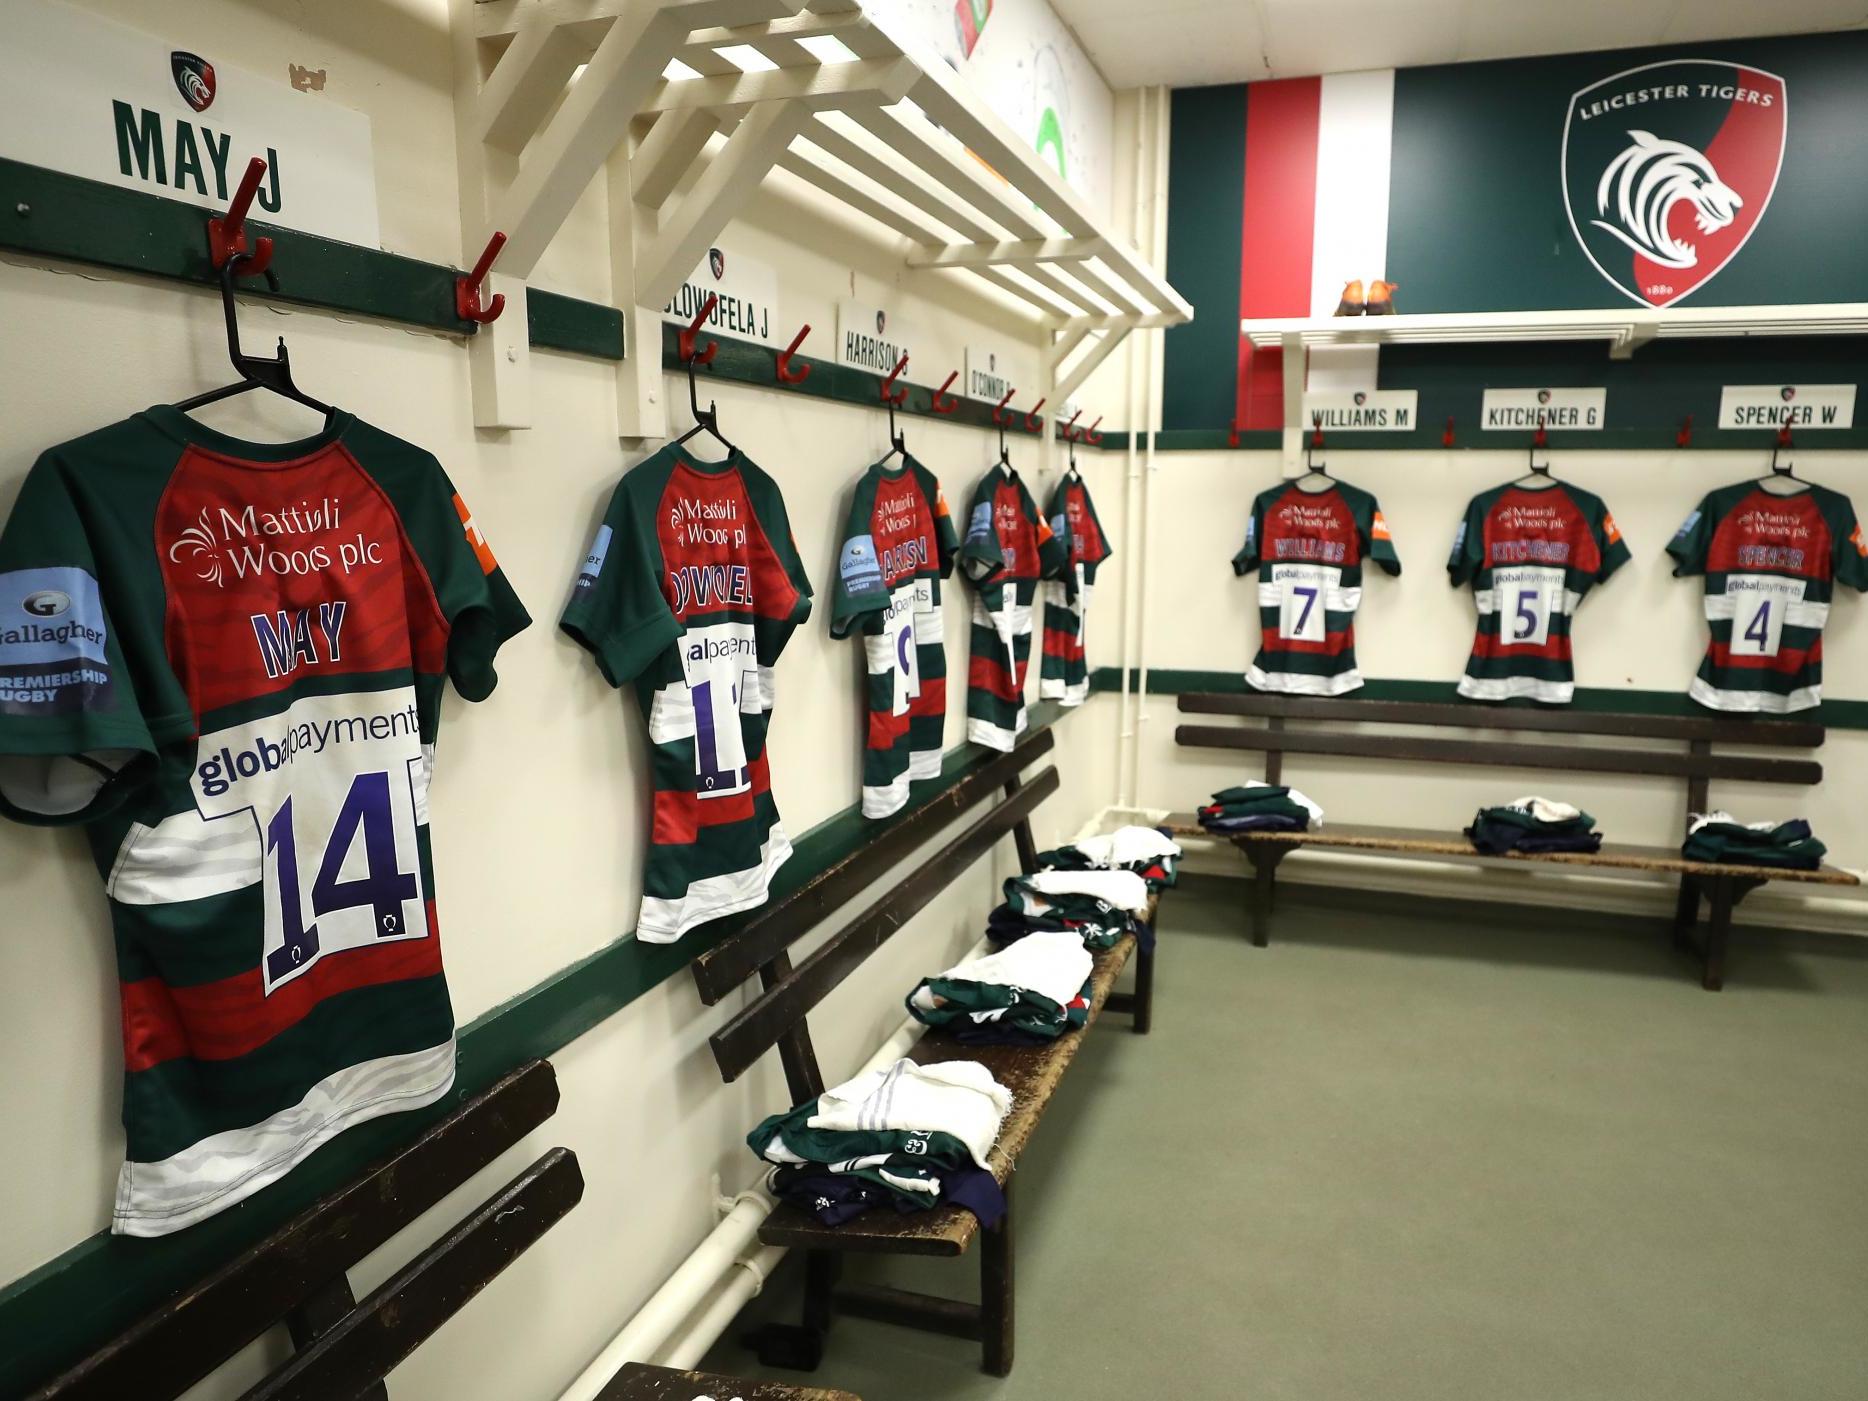 Clubs such as Leicester Tigers have a reputation for breeding unforgiving, hard-nosed changing-room cultures